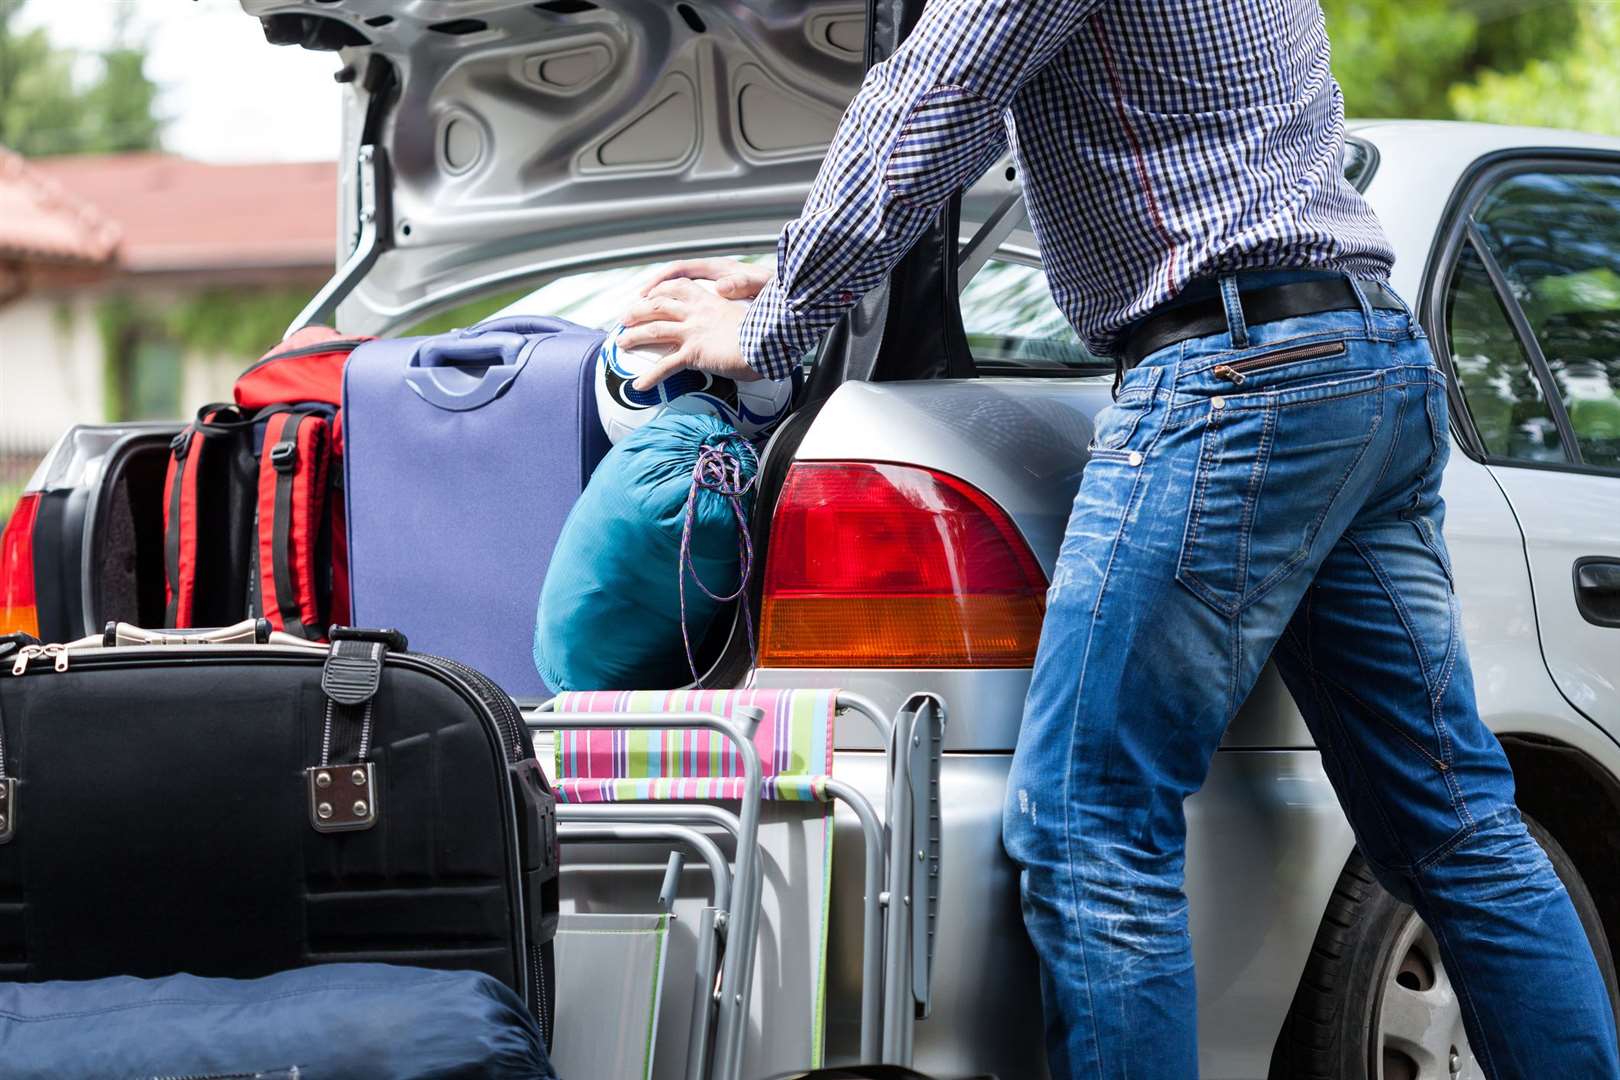 Travellers often don't know they've been conned until they arrive says ABTA. Photo: iStock.